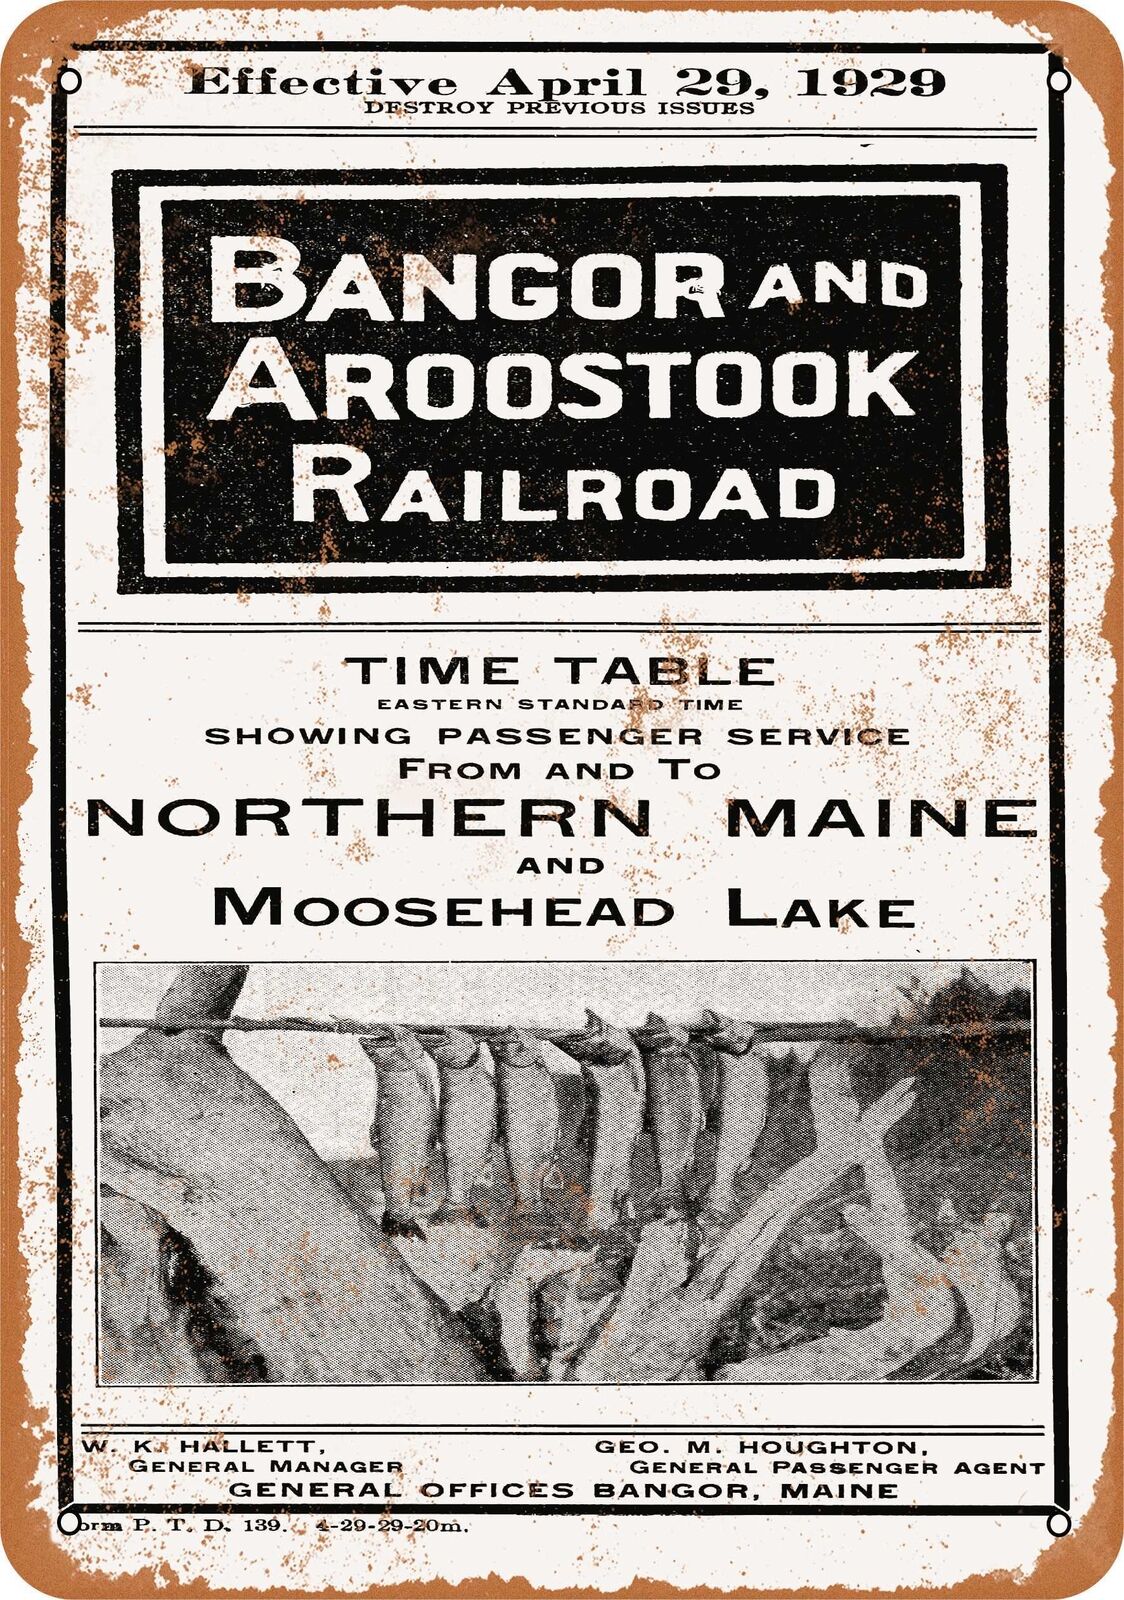 Metal Sign - 1952 Bangor and Aroostook Railroad Northern Maine - Reproduction